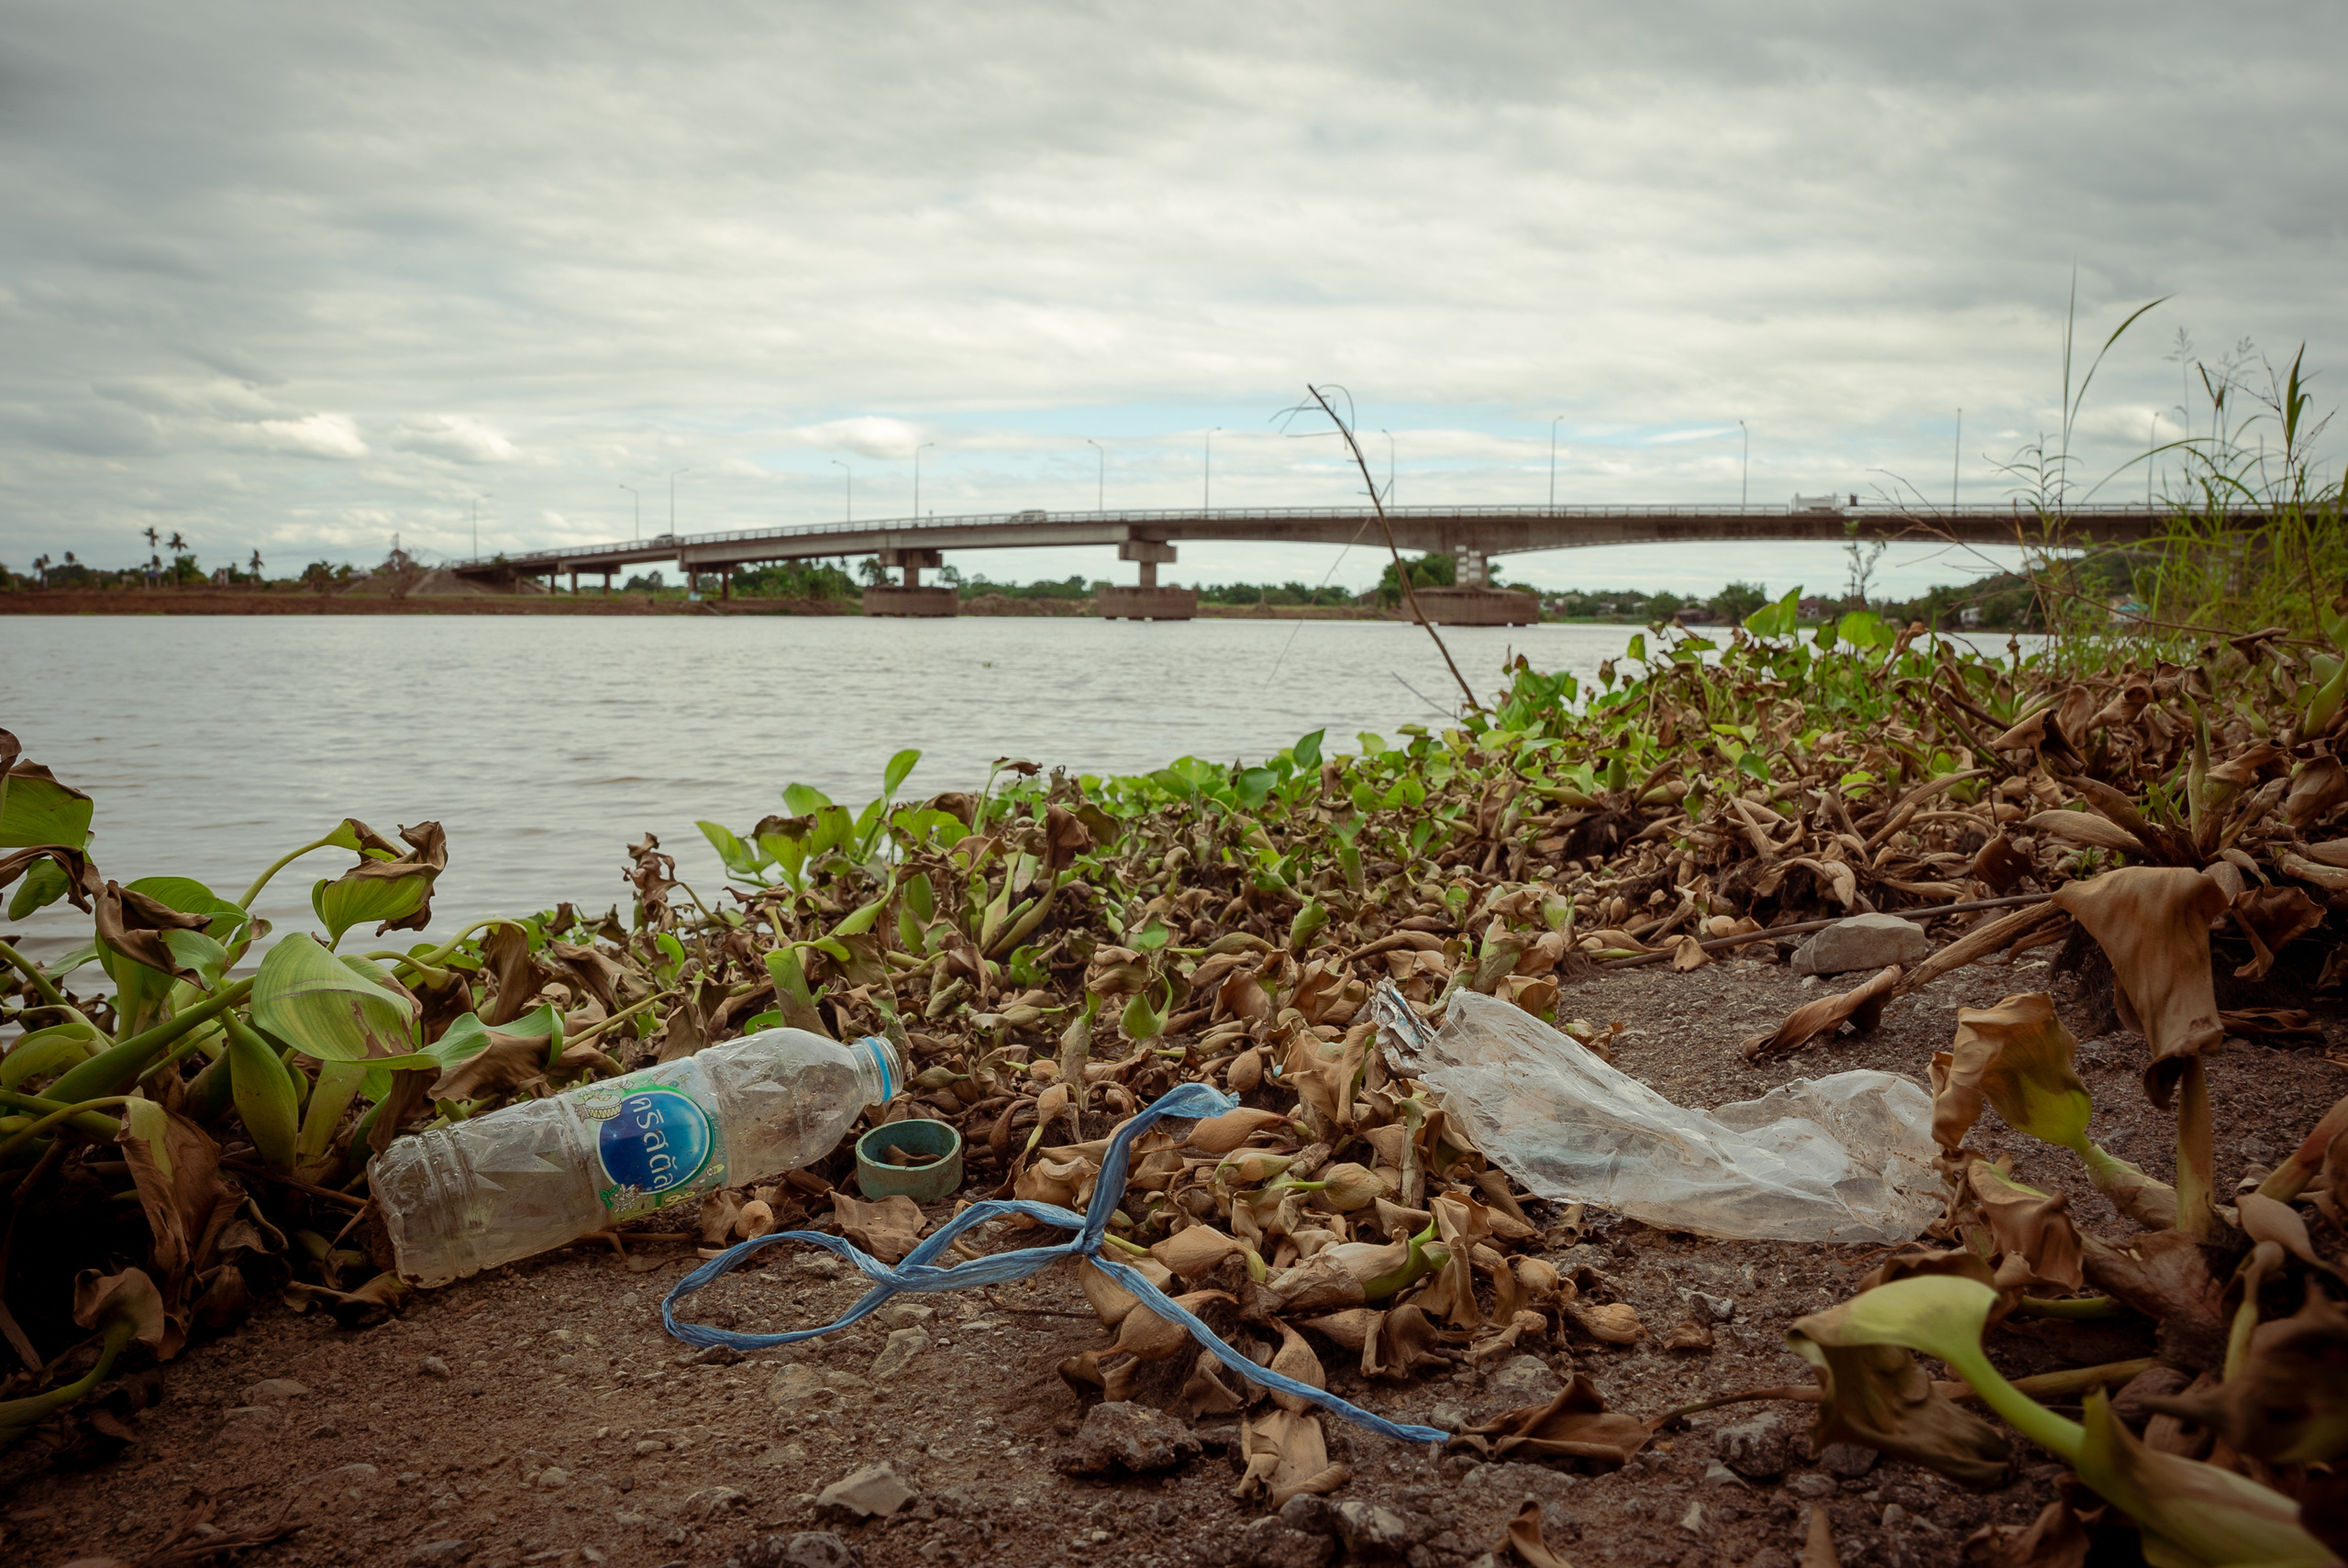 plastic waste among low plants near river bank